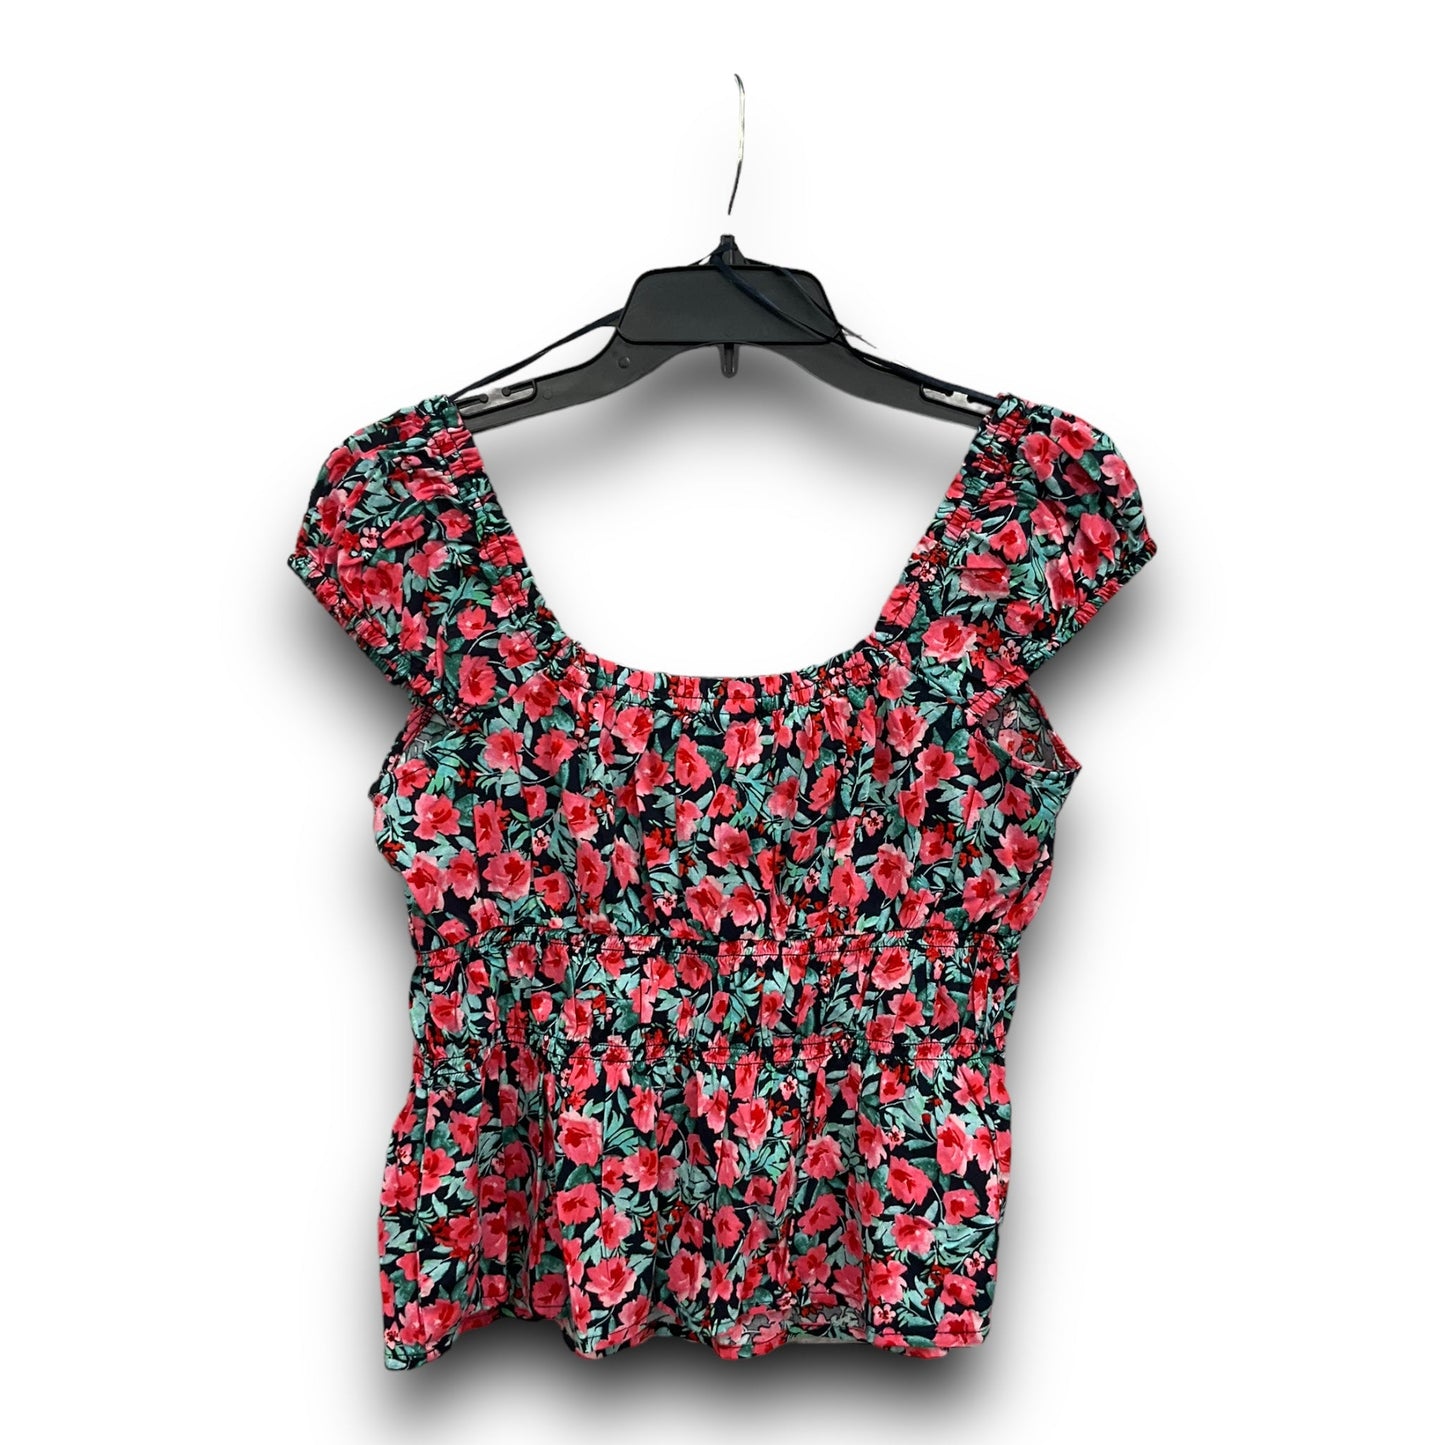 Floral Print Top Sleeveless Old Navy, Size S